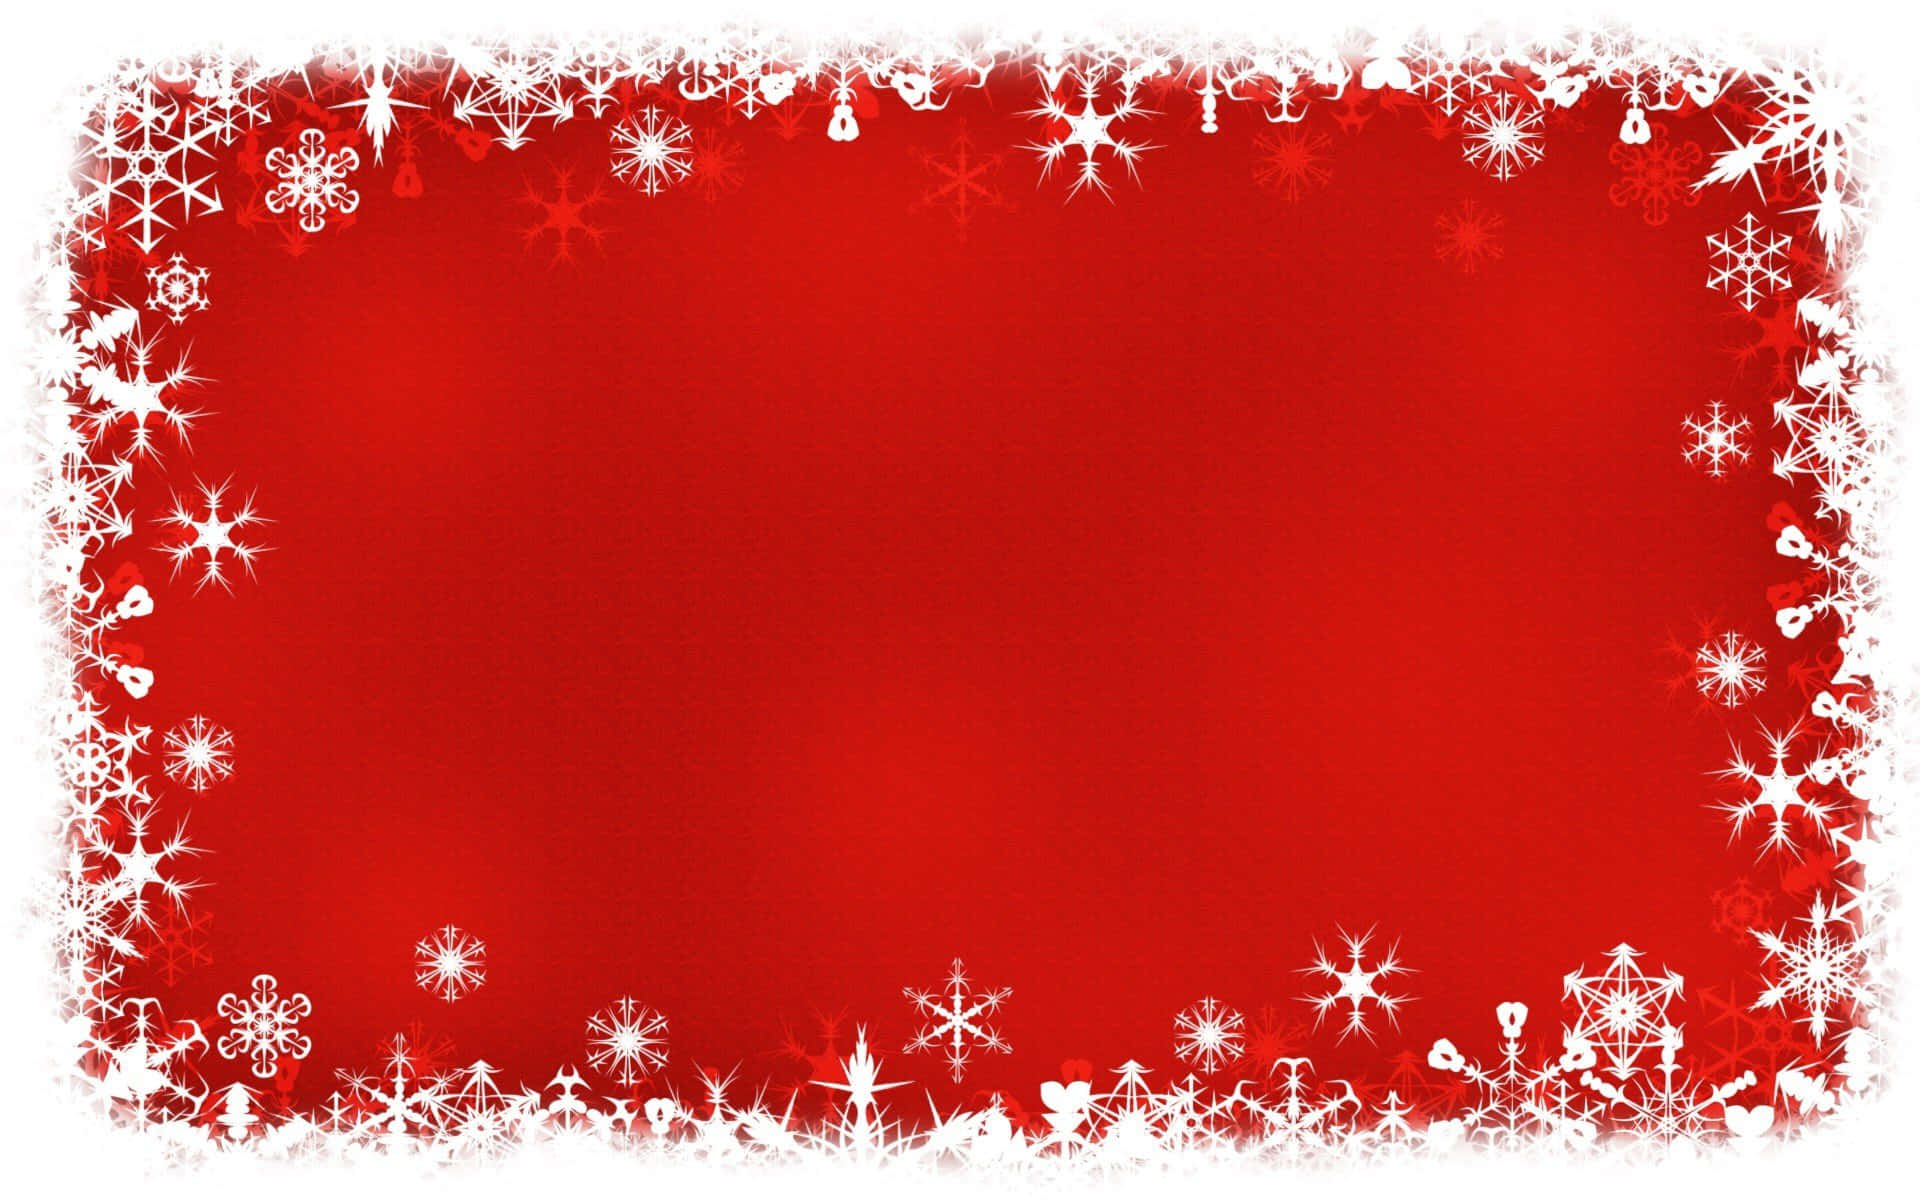 christmas power point templates